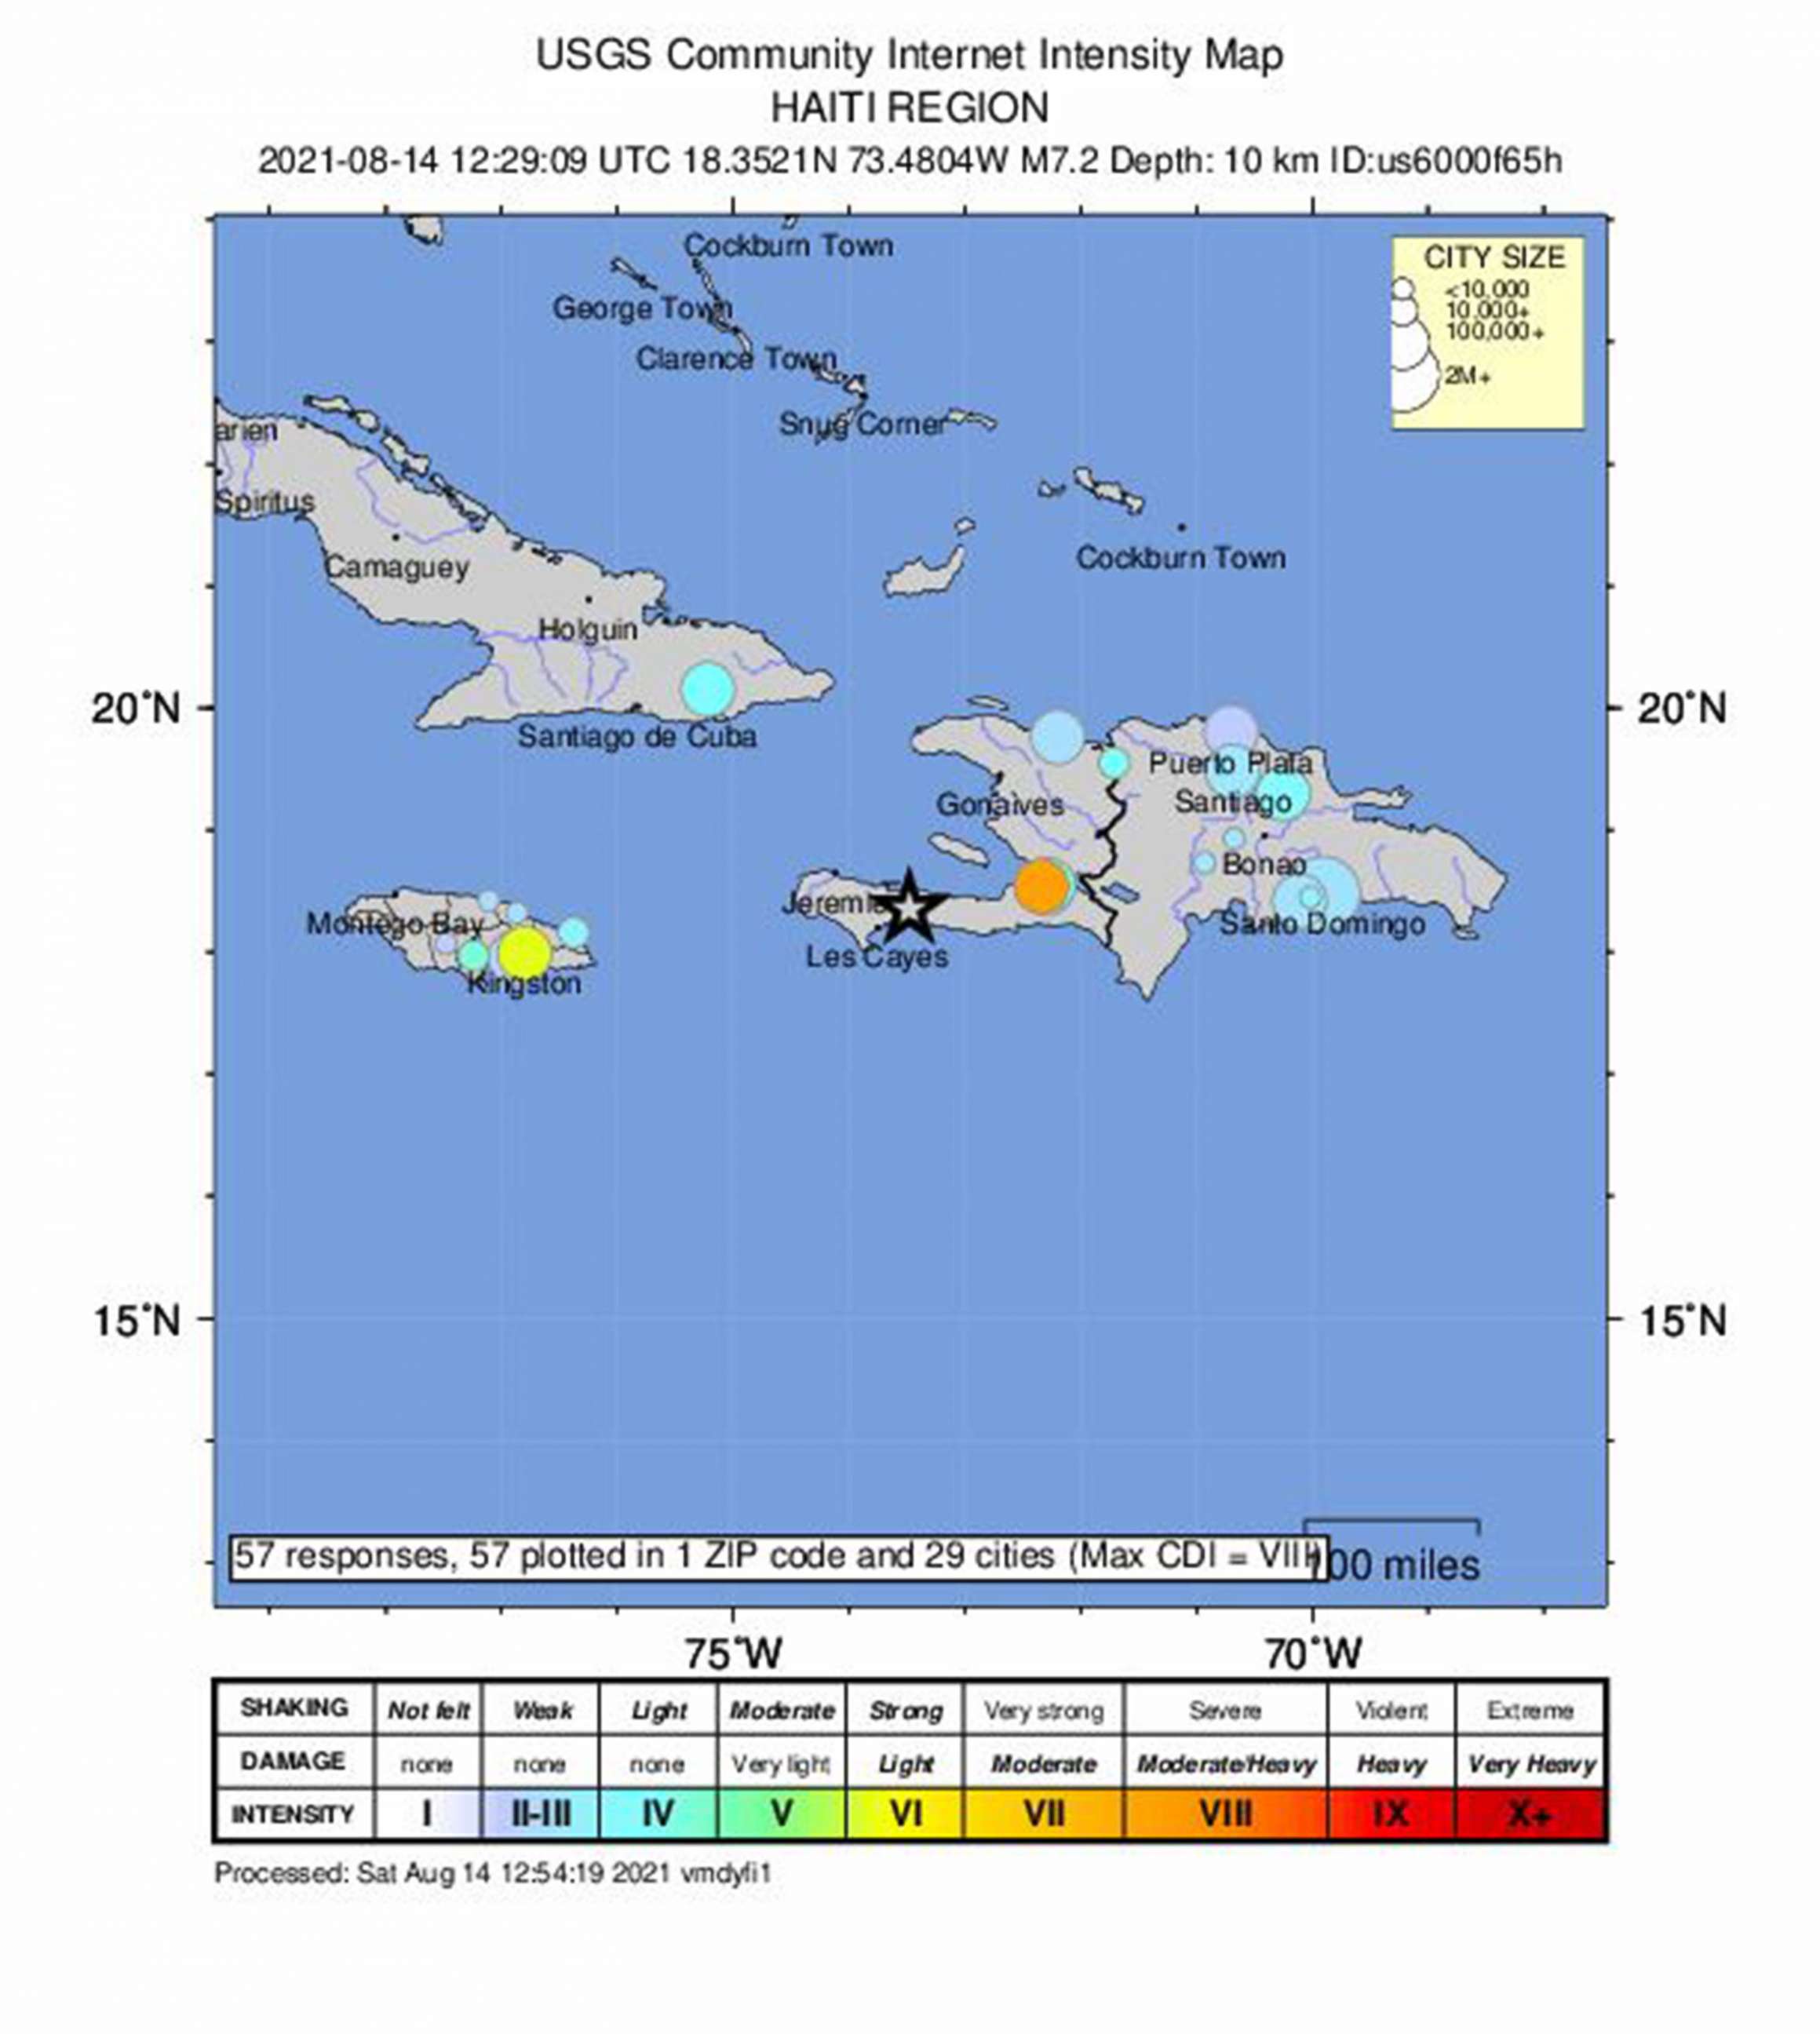 PHOTO: A handout shakemap made available by the United States Geological Survey (USGS) shows the location of a 7.2-magnitude earthquake hitting near Saint-Louis du Sud, Haiti, Aug. 14, 2021.